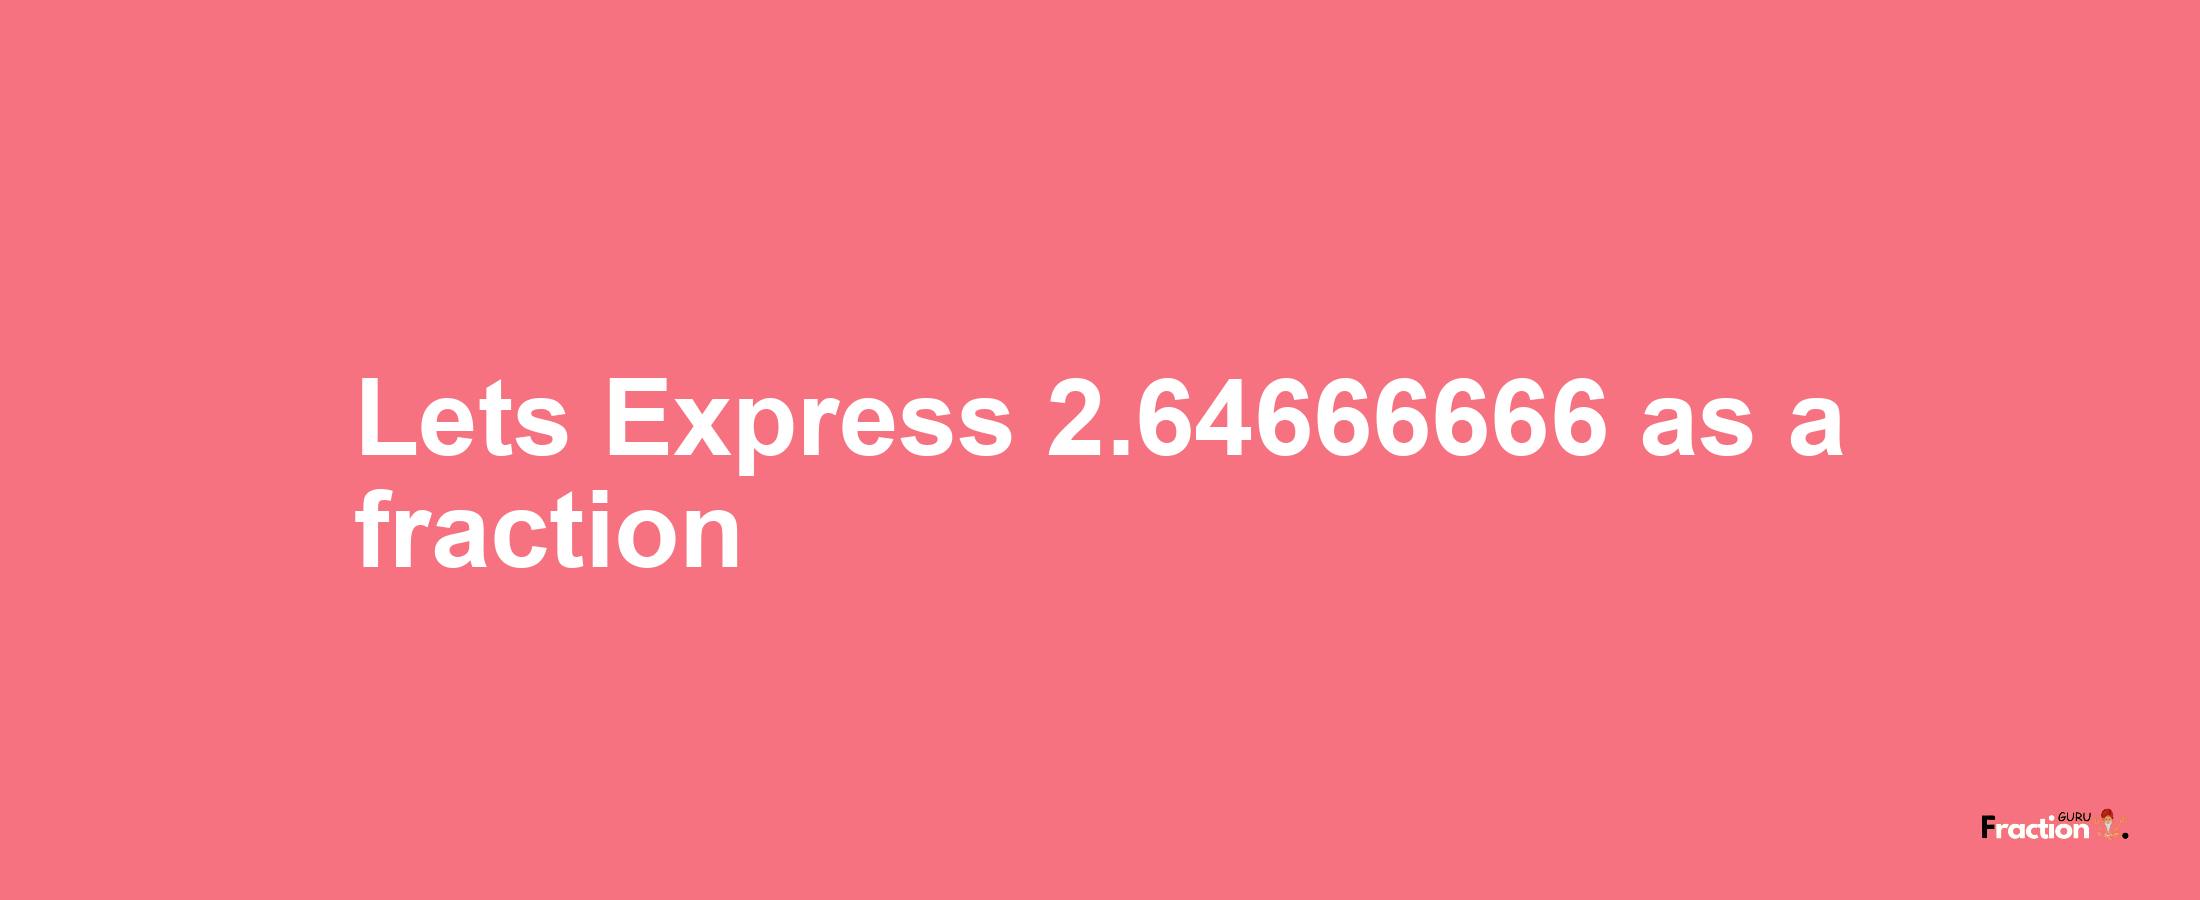 Lets Express 2.64666666 as afraction